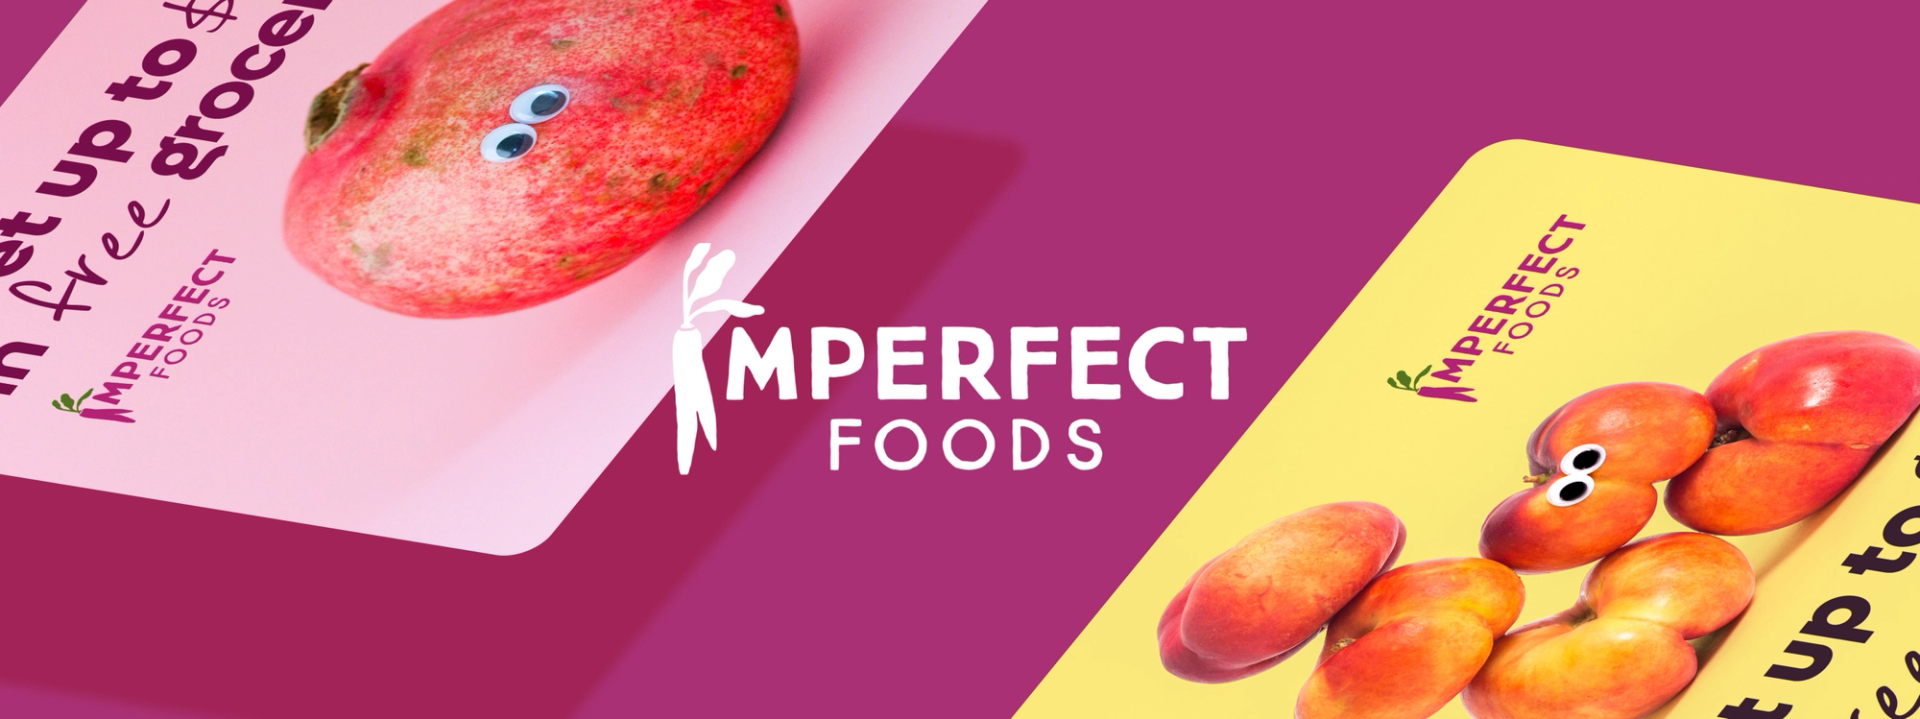 How Imperfect Foods Fuels Growth With a Dedicated Creative Team